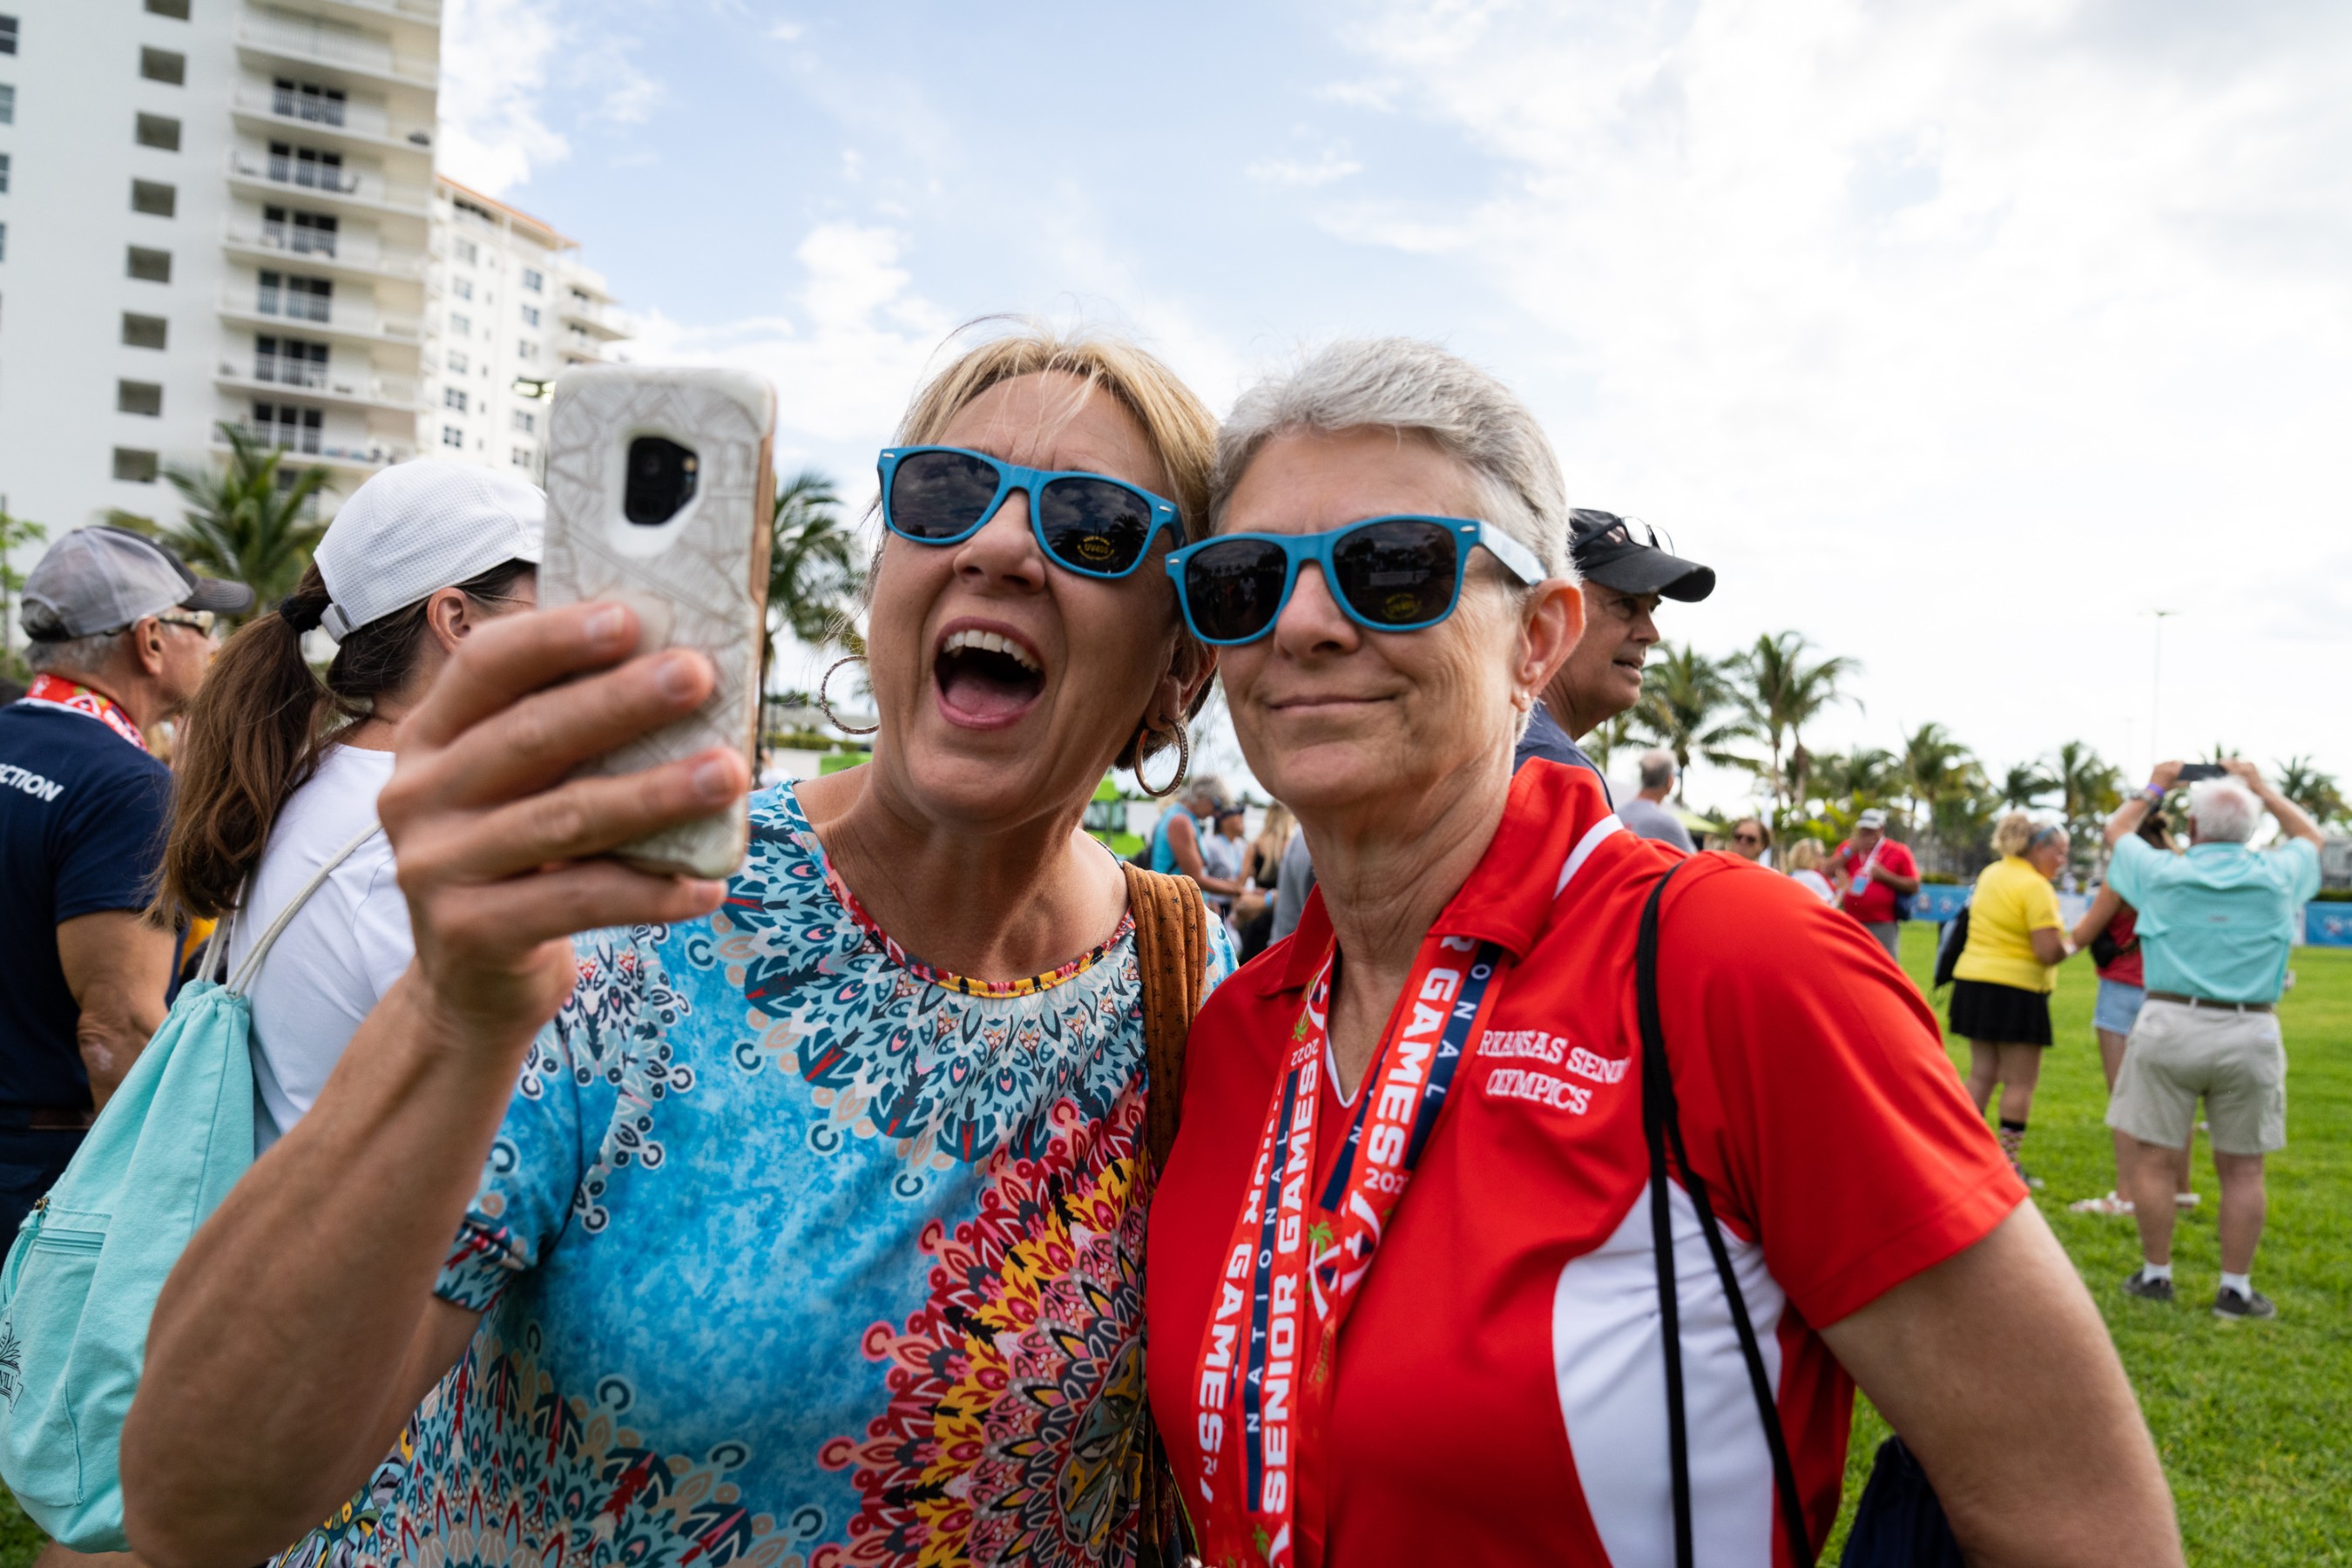 Participants stay shady in complimentary iovera° sunglasses during the outdoor event to attempt to break the GUINNESS WORLD RECORDS™ title for the Largest Game of Freeze Dance, at Las Olas Intracoastal Promenade Park in Fort Lauderdale, Florida, during the 2022 National Senior Games